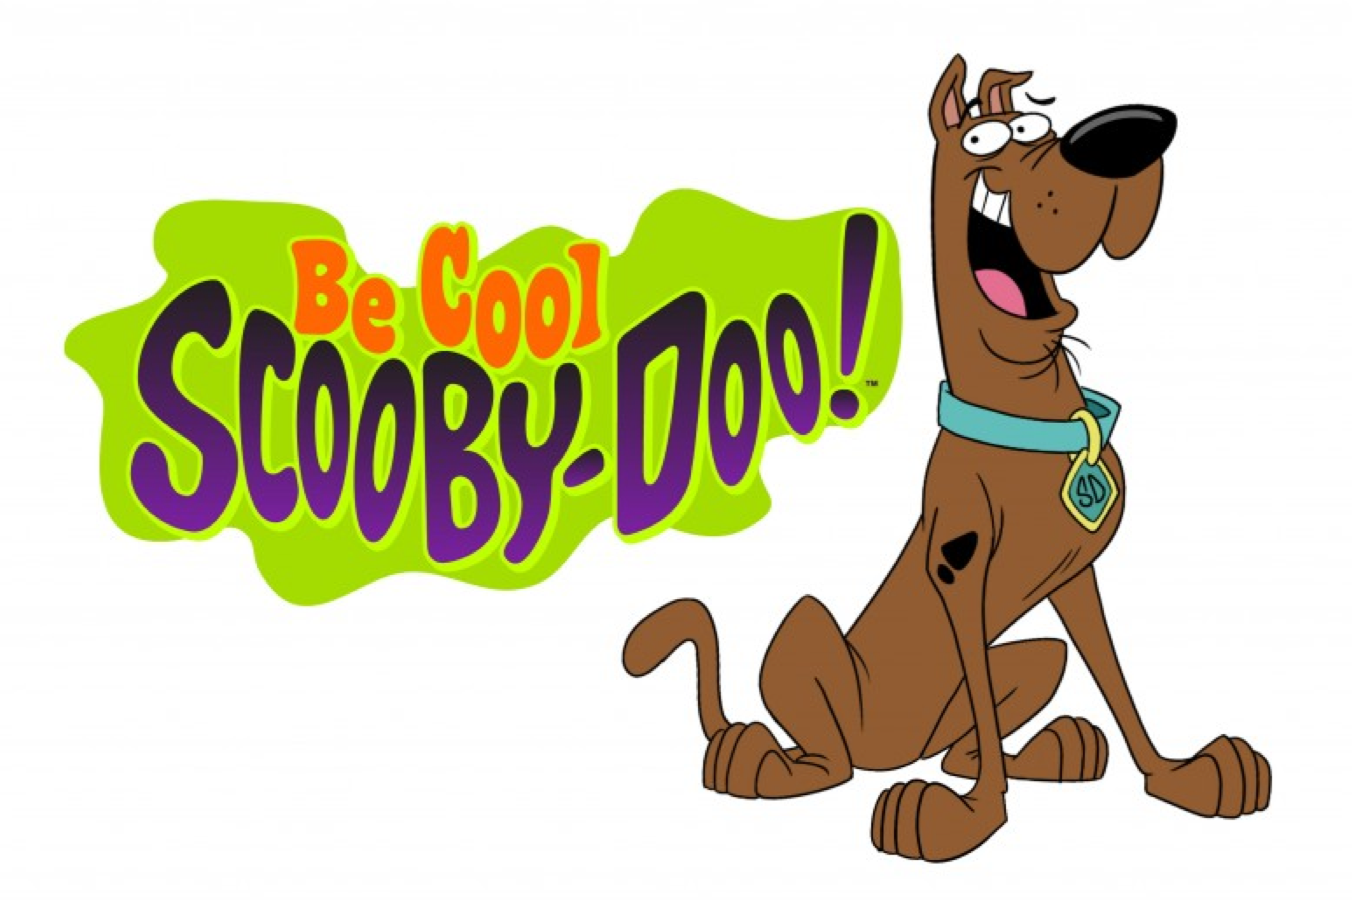 be cool scooby-doo